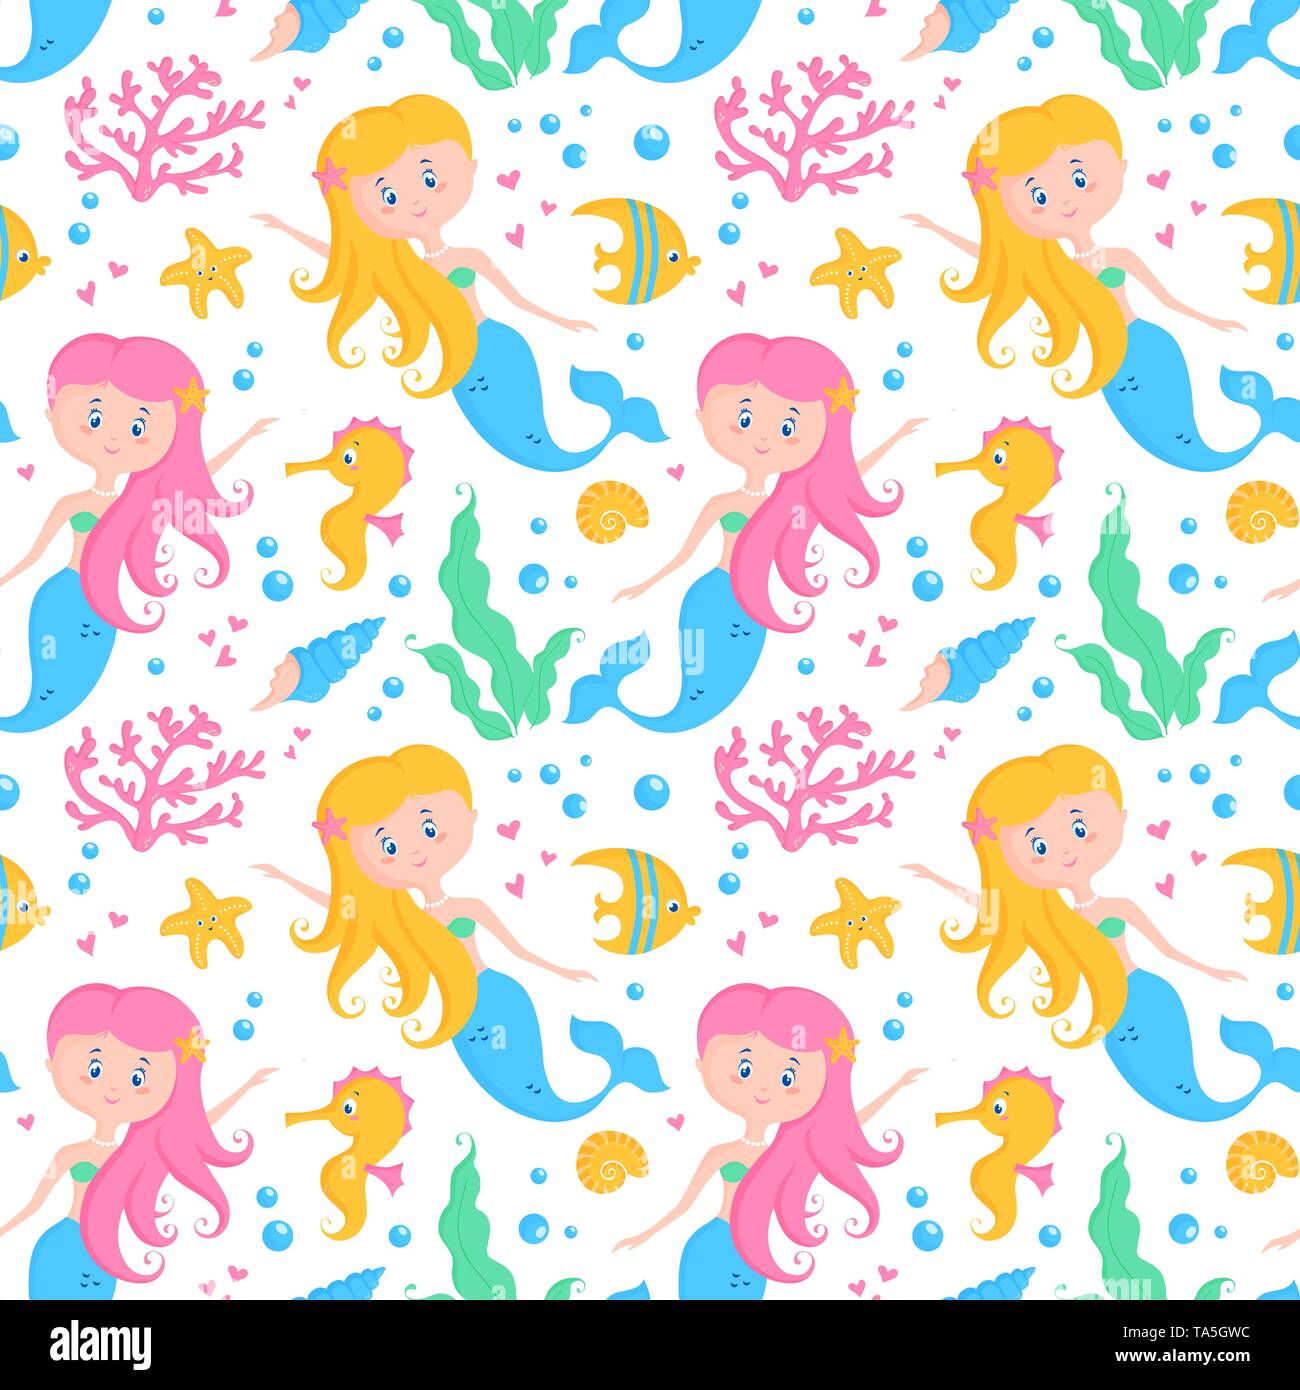 Seamless pattern with little mermaids, cute sea animals and plants - seahorses, fishes, starfishes, shells, corals, seaweeds. Undersea vector backgrou Stock Vector